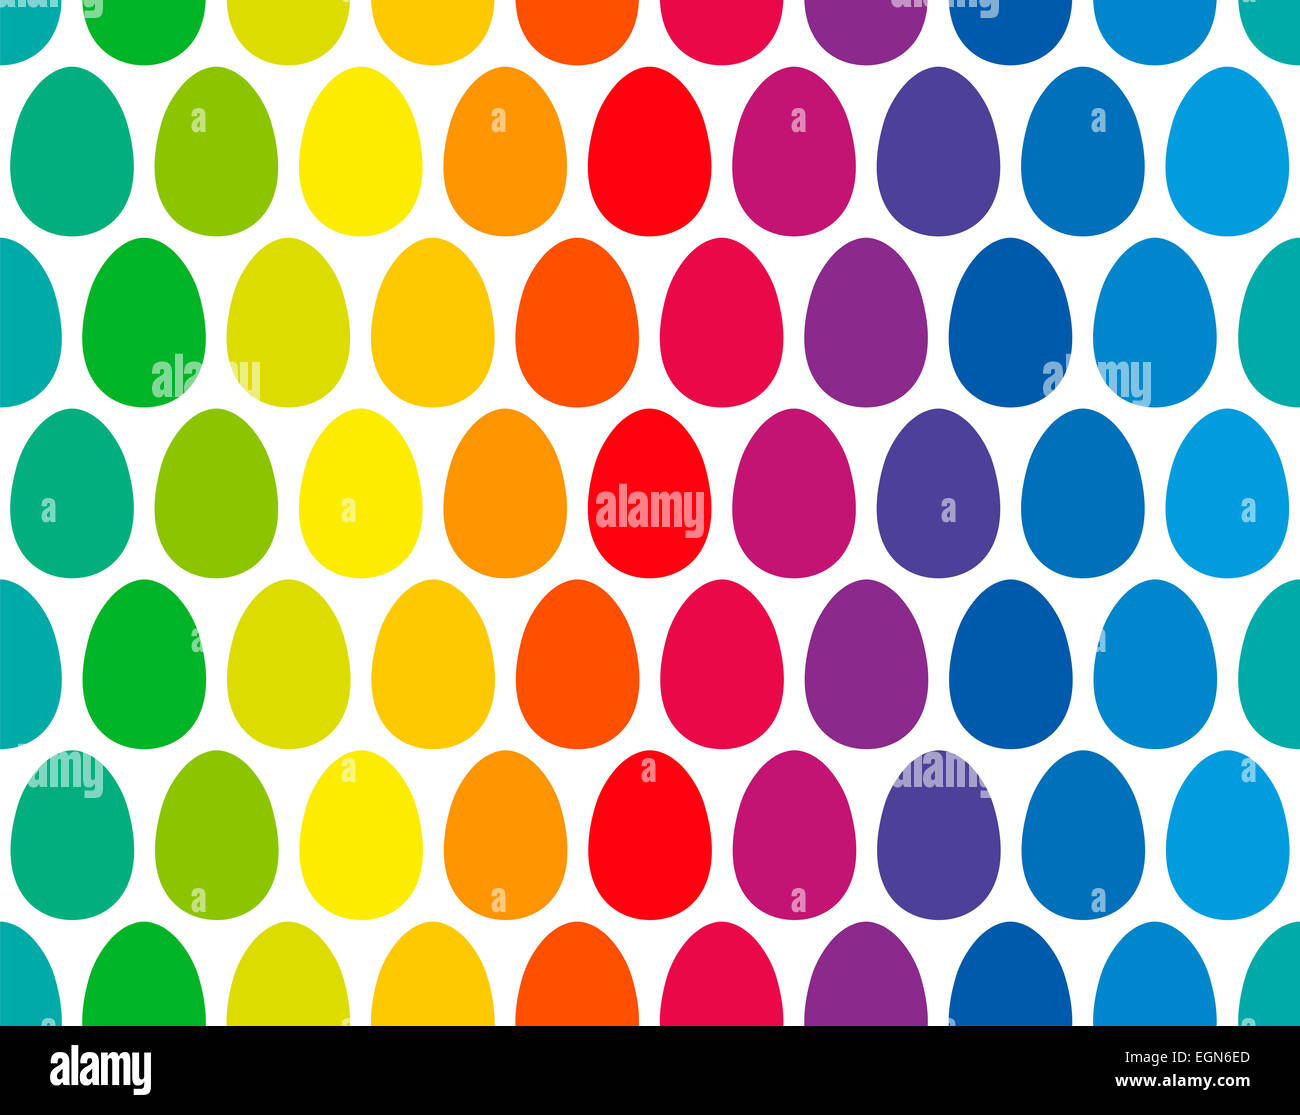 Easter eggs colored like the rainbow - seamless pattern. Stock Photo